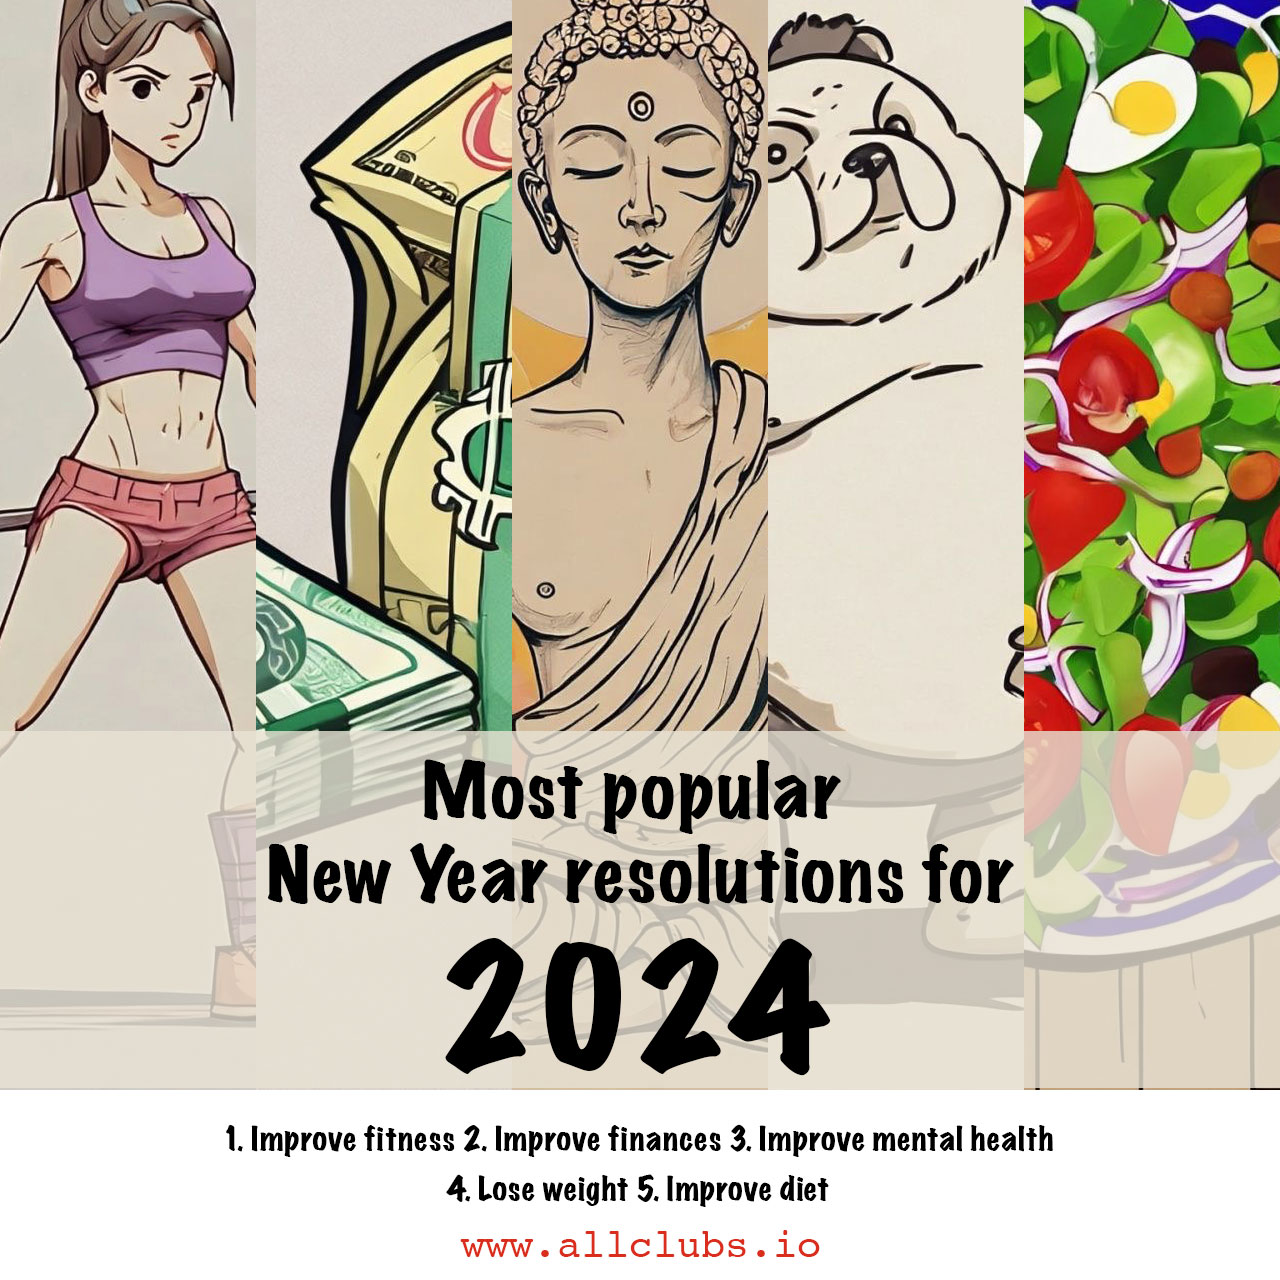 Most popular New Year resolutions 2024